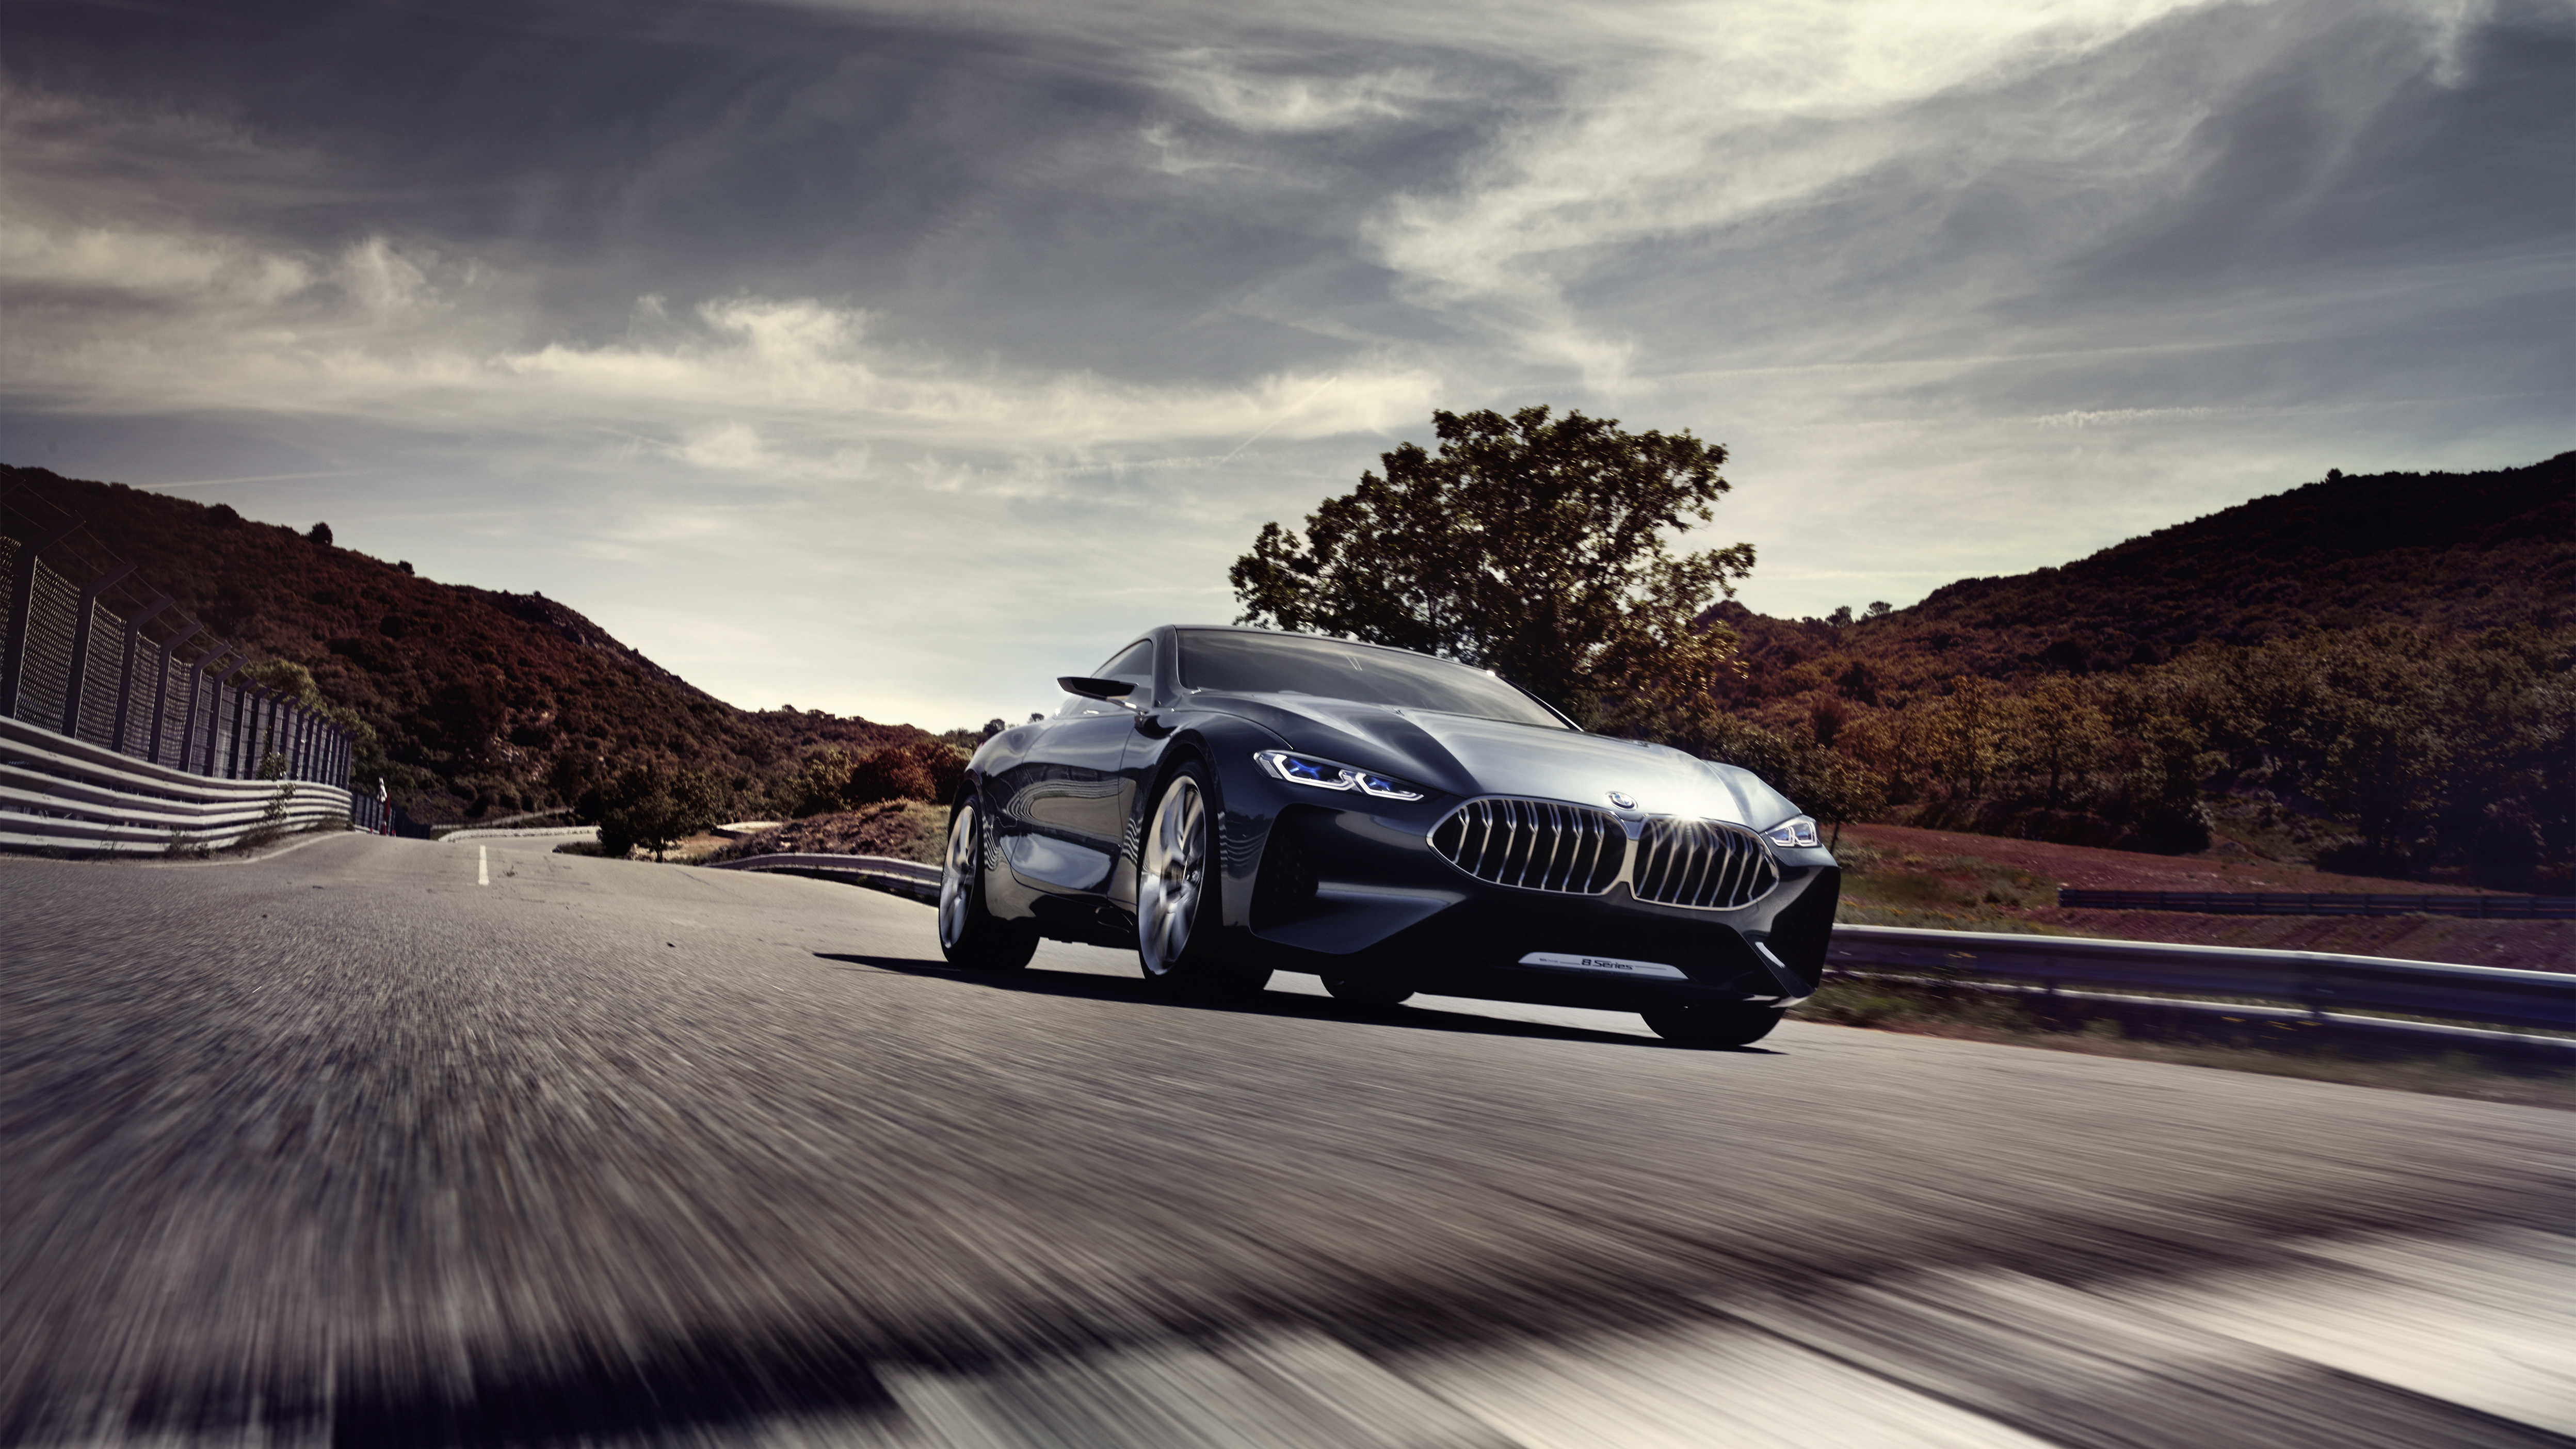 Bmw Concept Series 4k Ultra HD Wallpaper Background Image